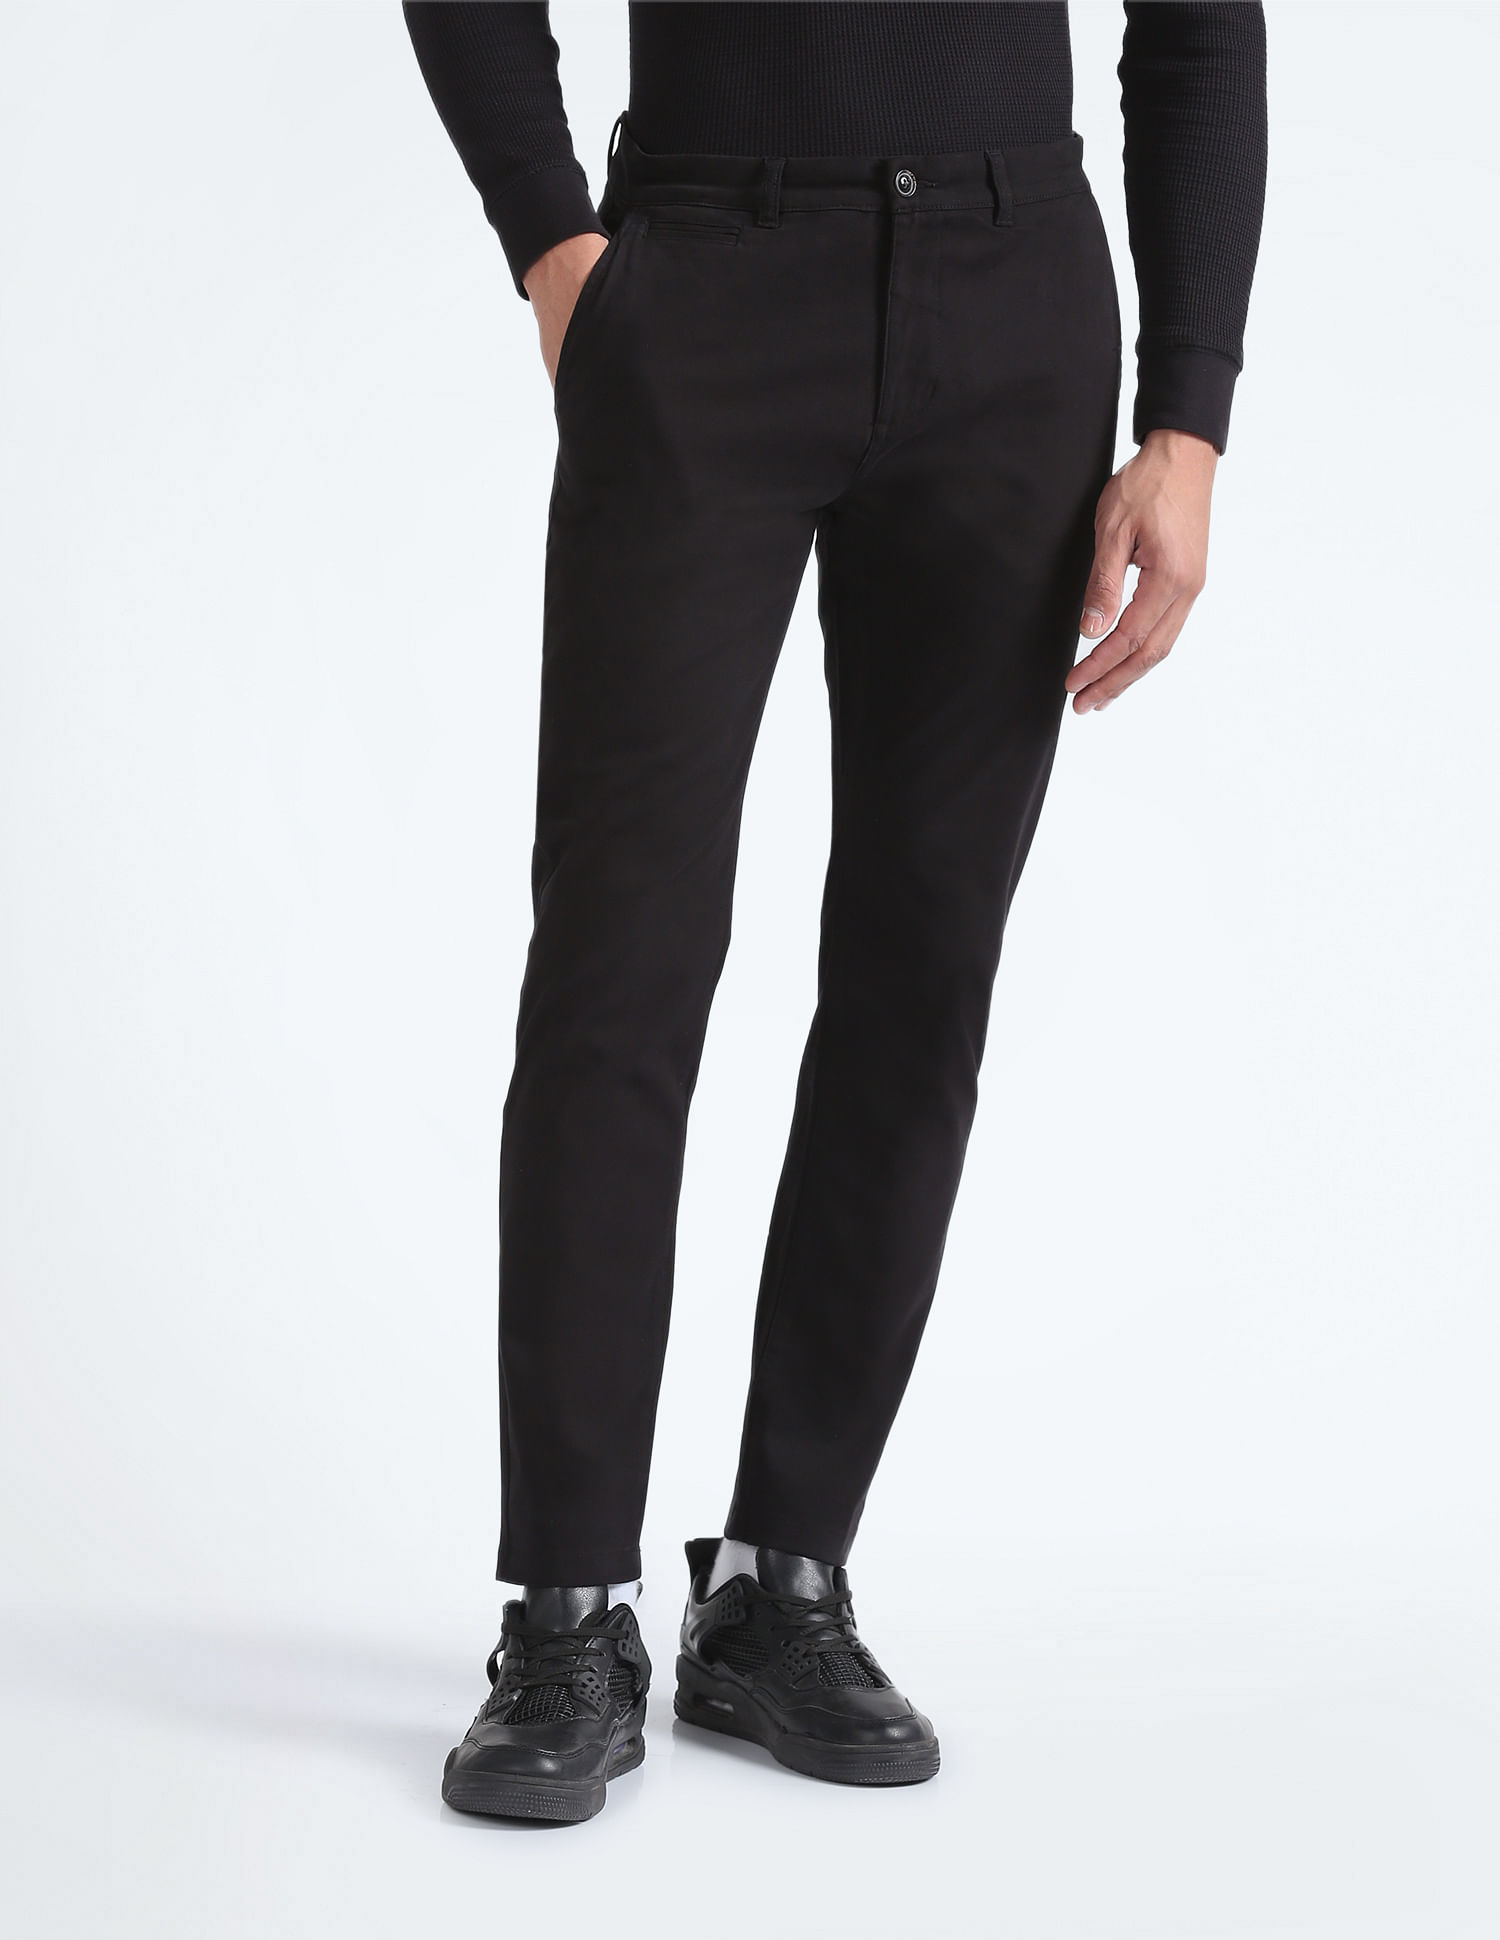 Discover 198+ twill trousers skinny fit latest